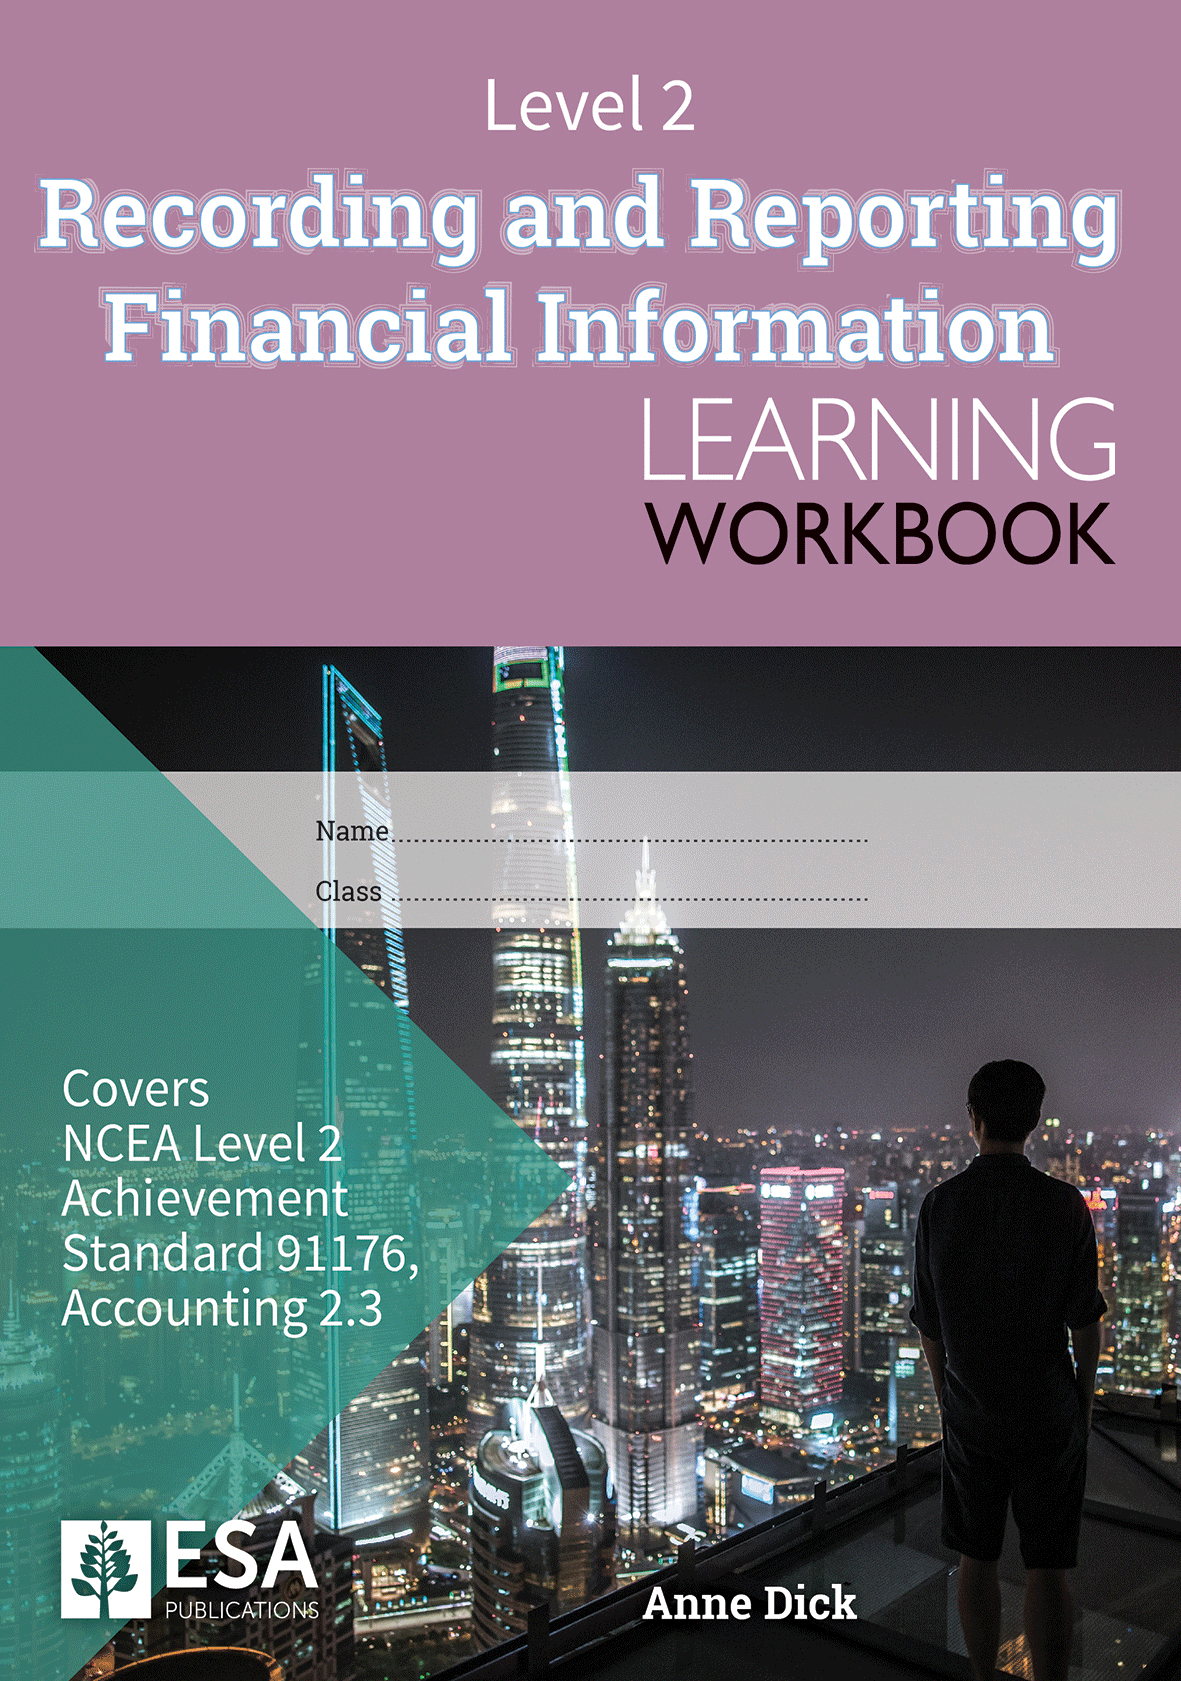 Level 2 Recording and Reporting Financial Information 2.3 Learning Workbook